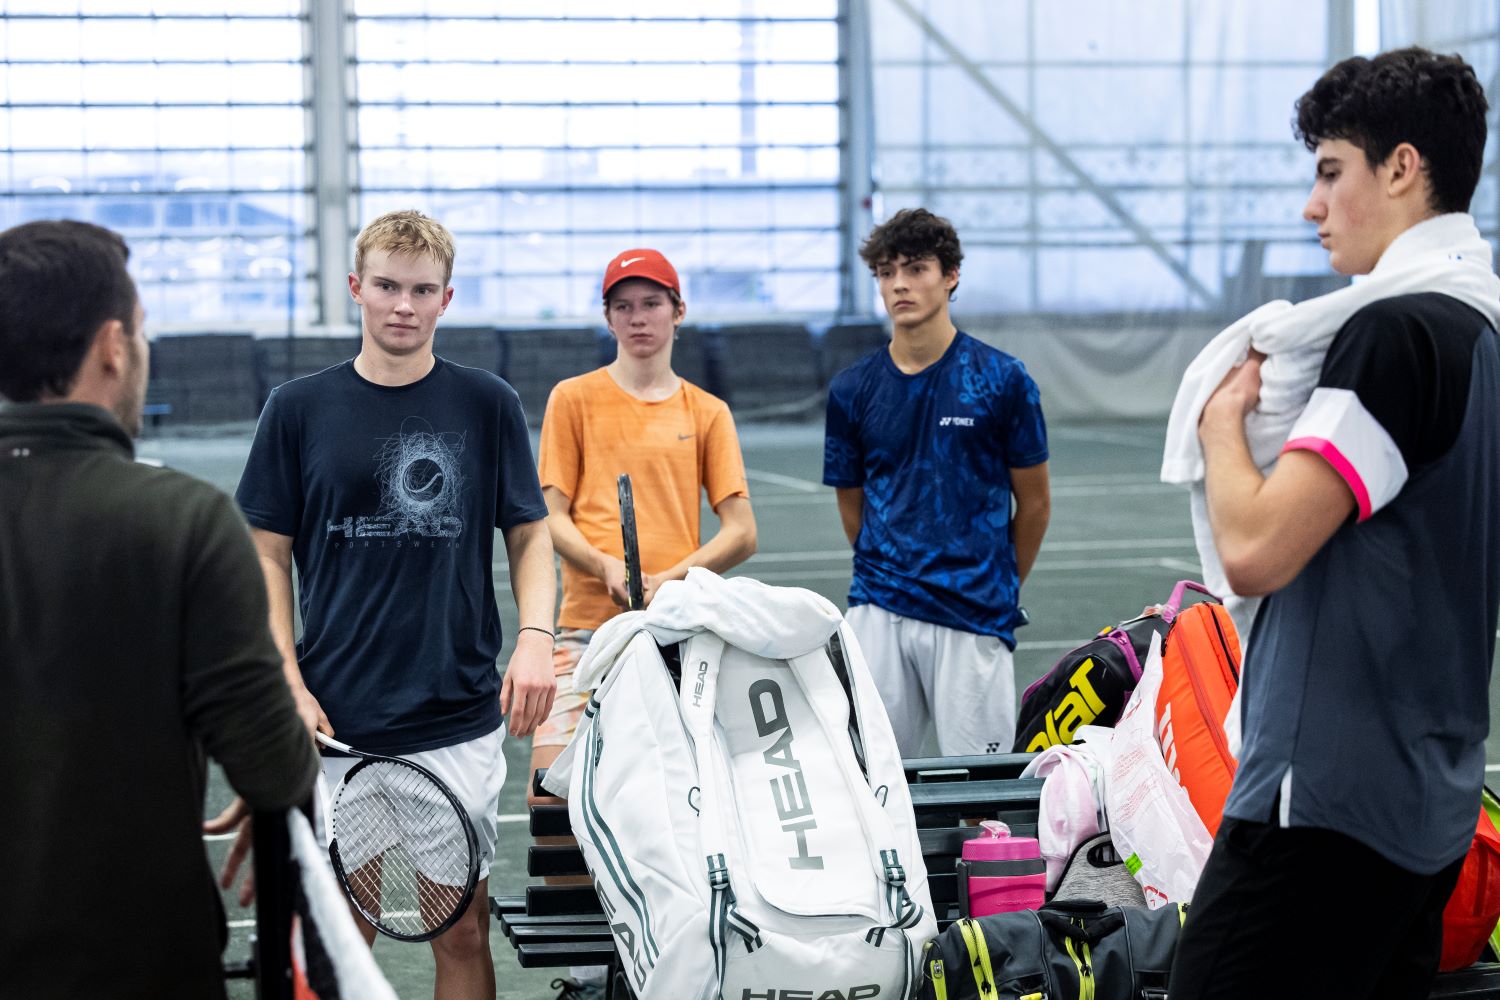 The Tennis Canada National Tennis Center presented by Rogers presents its 2023-2024 class